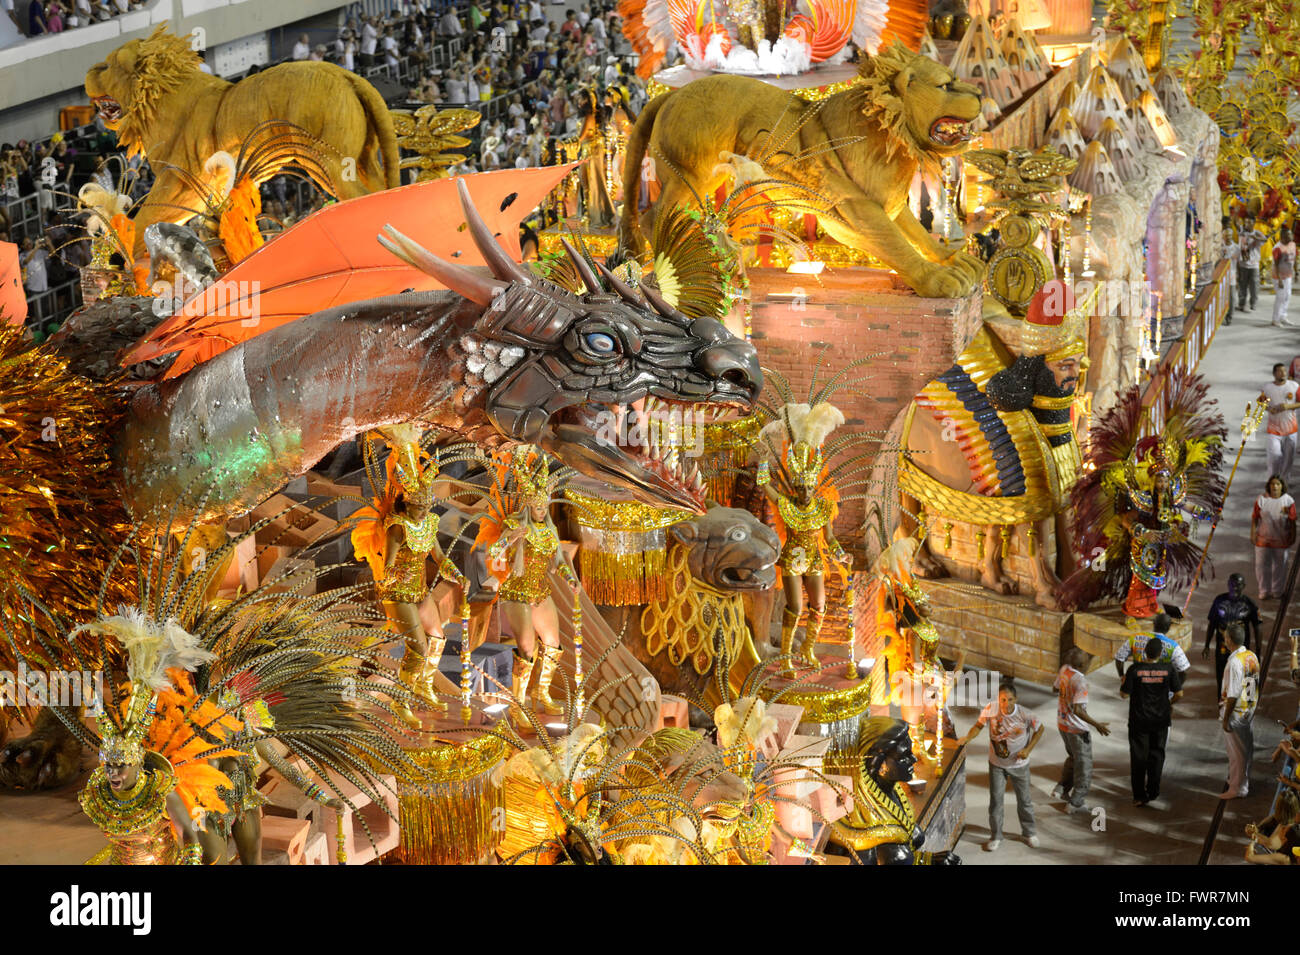 Allegories float with wild mythical creatures, dragons and lions, parade of the samba school Estacio de Sá Stock Photo